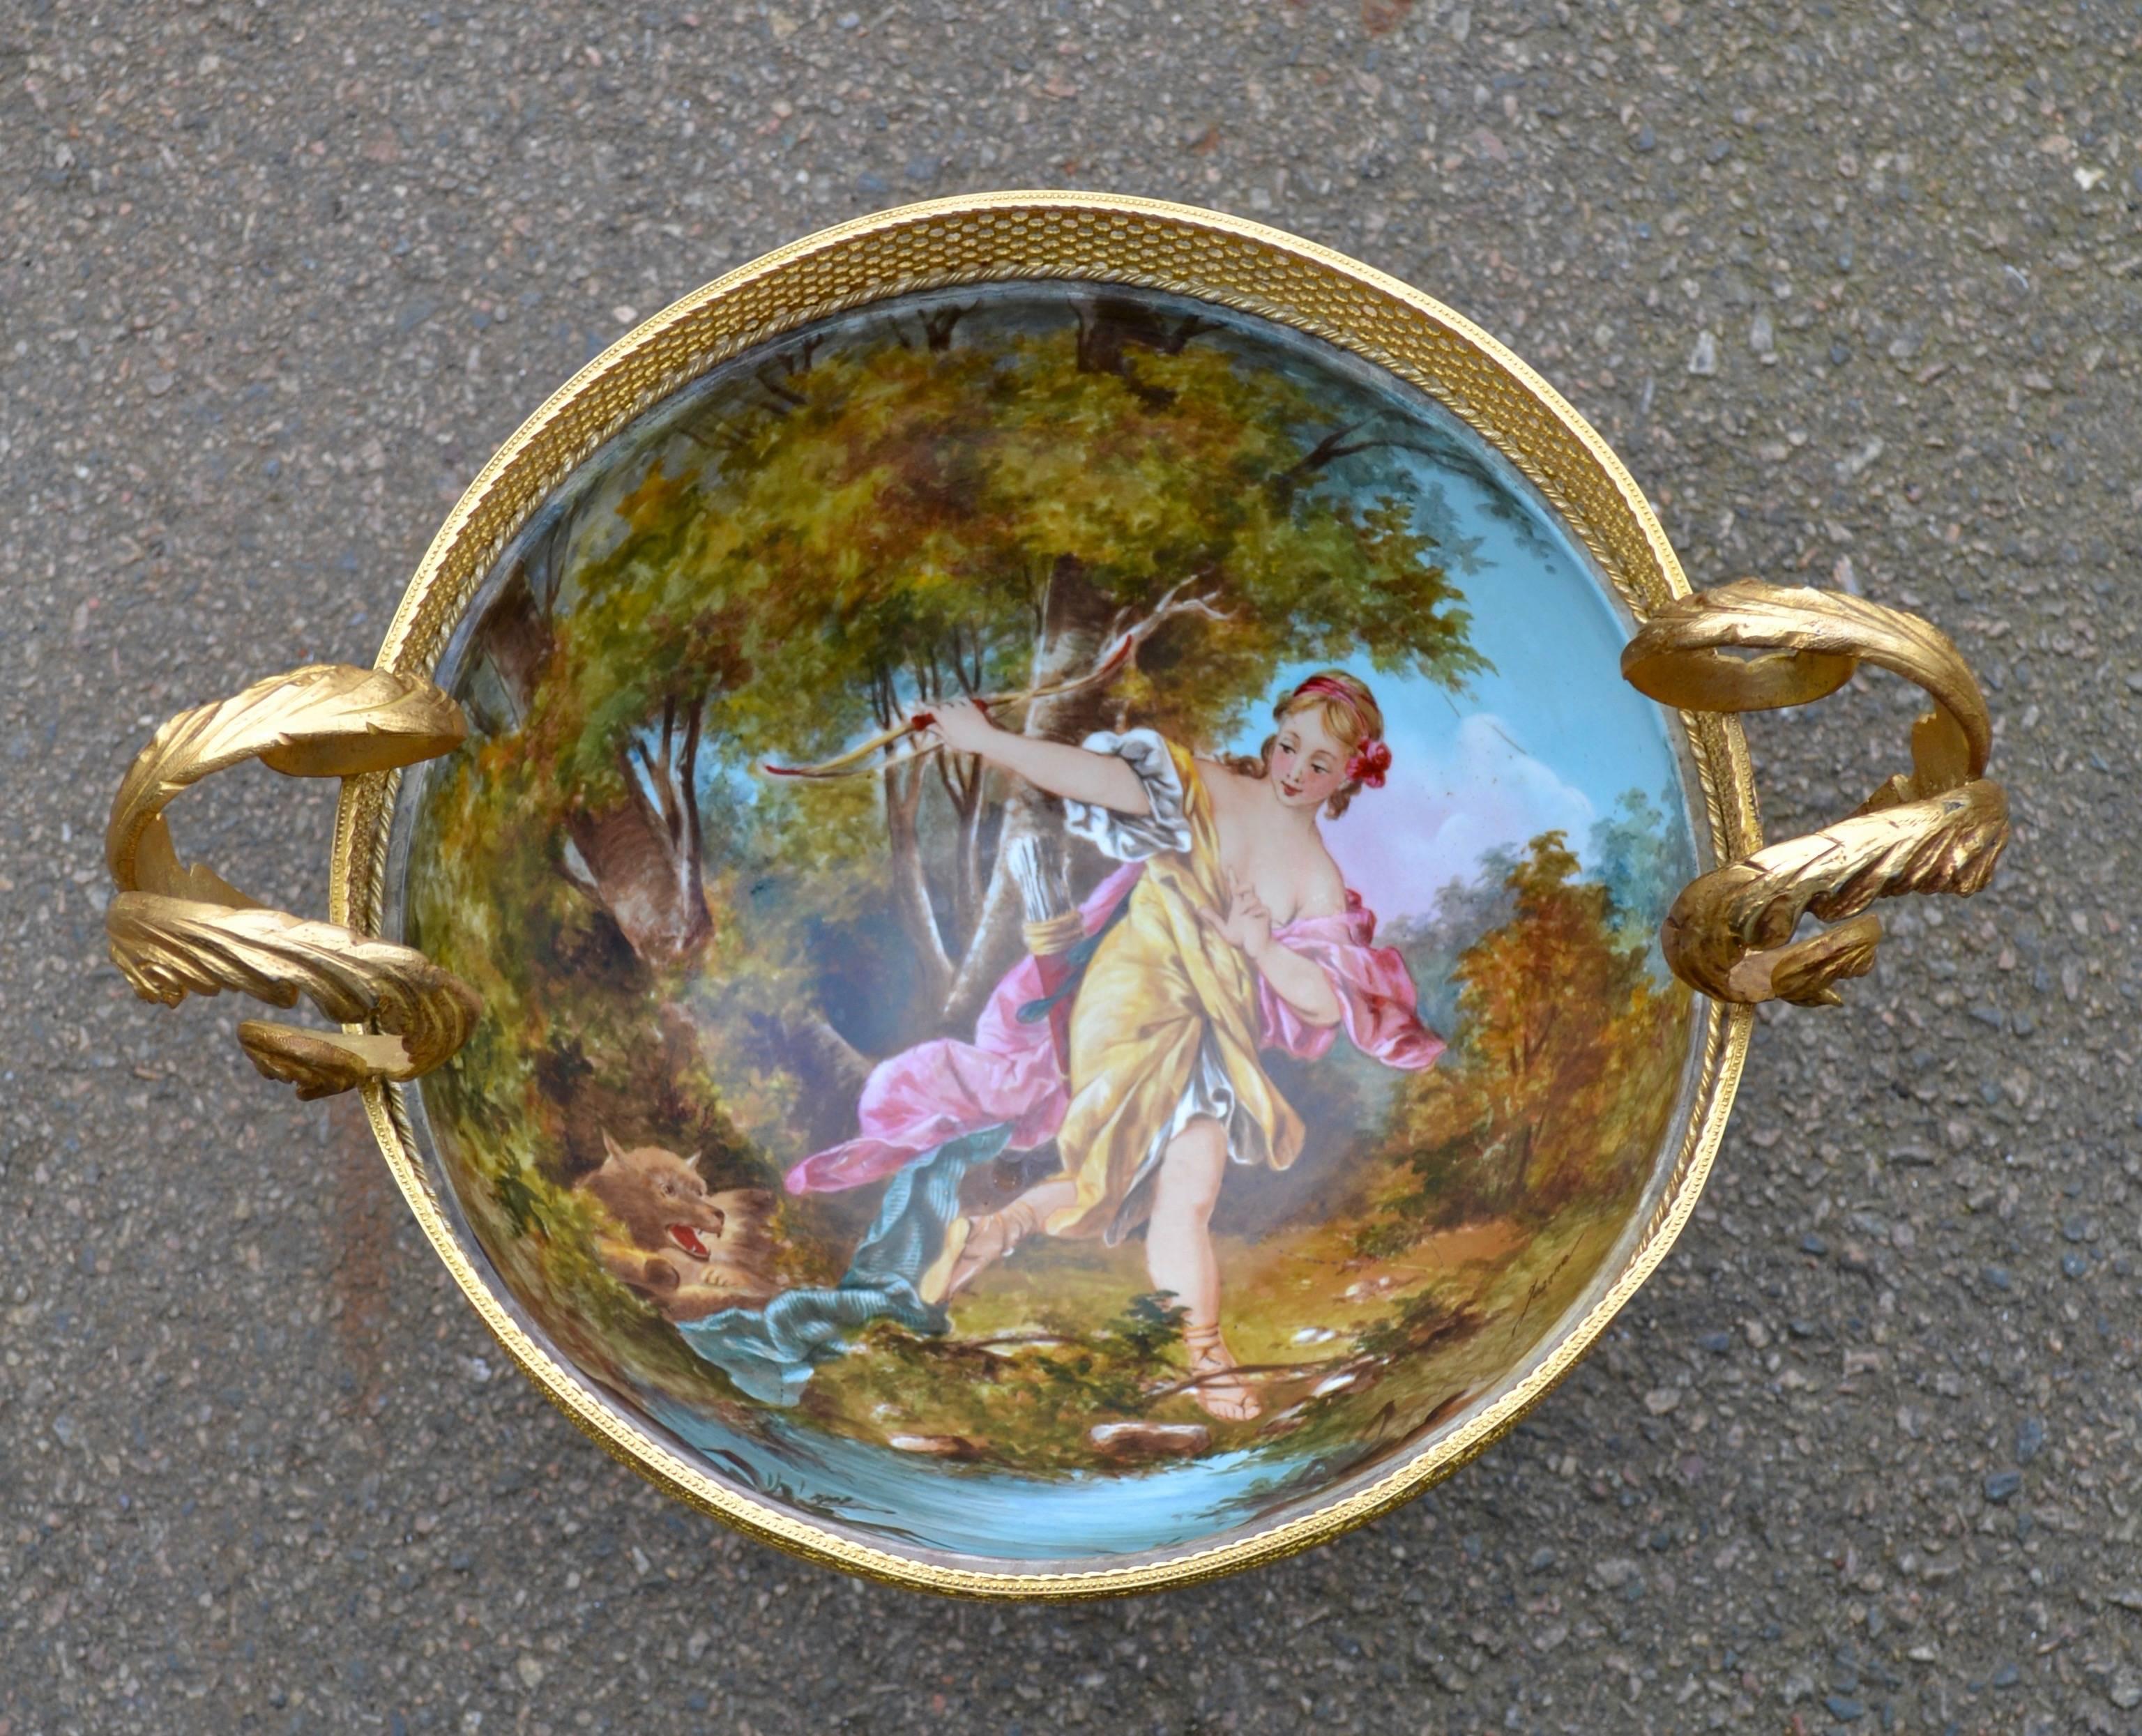 19th Century Sèvres French Hand-Painted Porcelain Jardiniére with Bronze Mounts For Sale 4